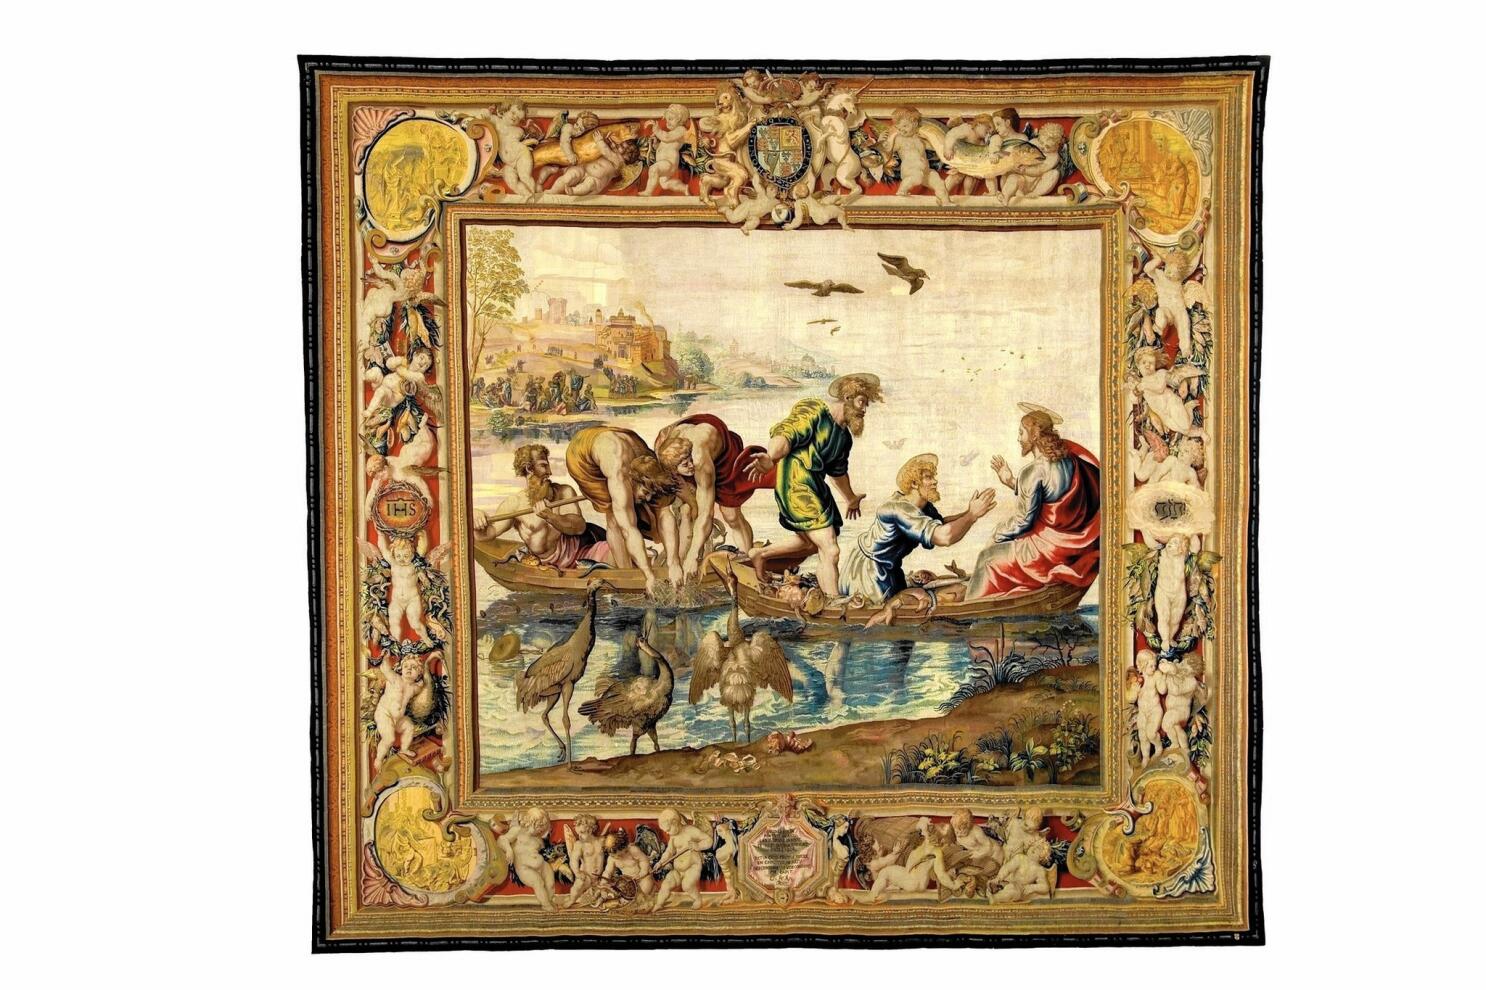 Audience with the Emperor', A Louis XIV tapestry, from the series